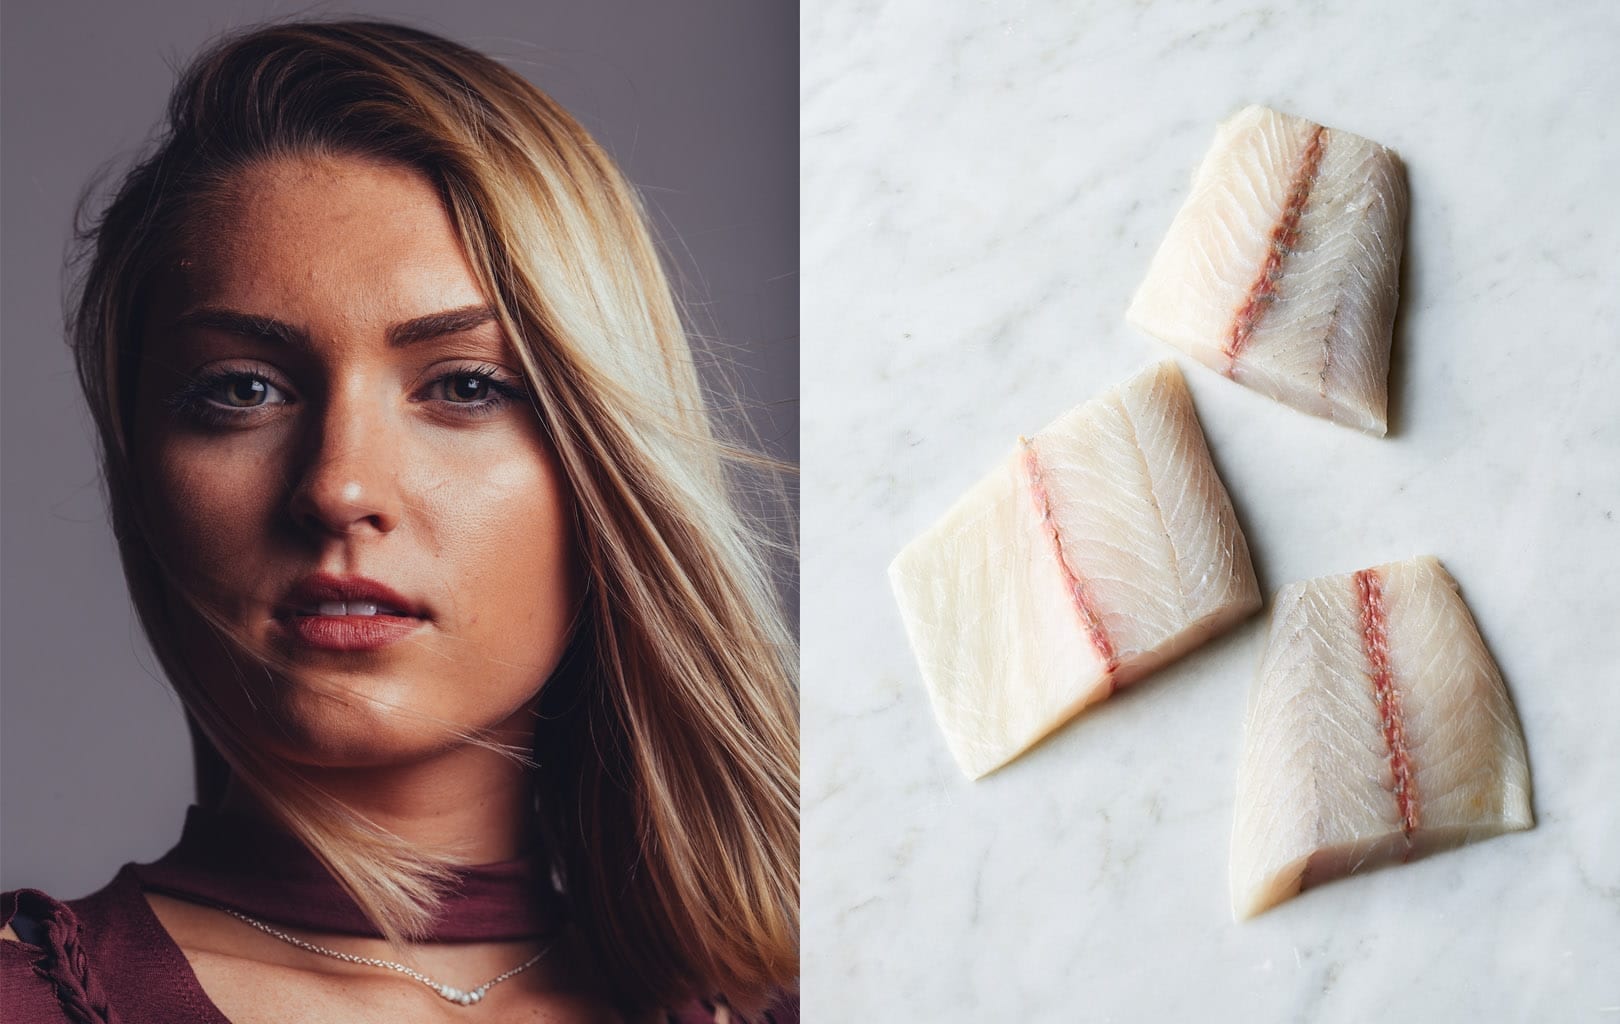 Face of woman juxtaposed next to fish fillets